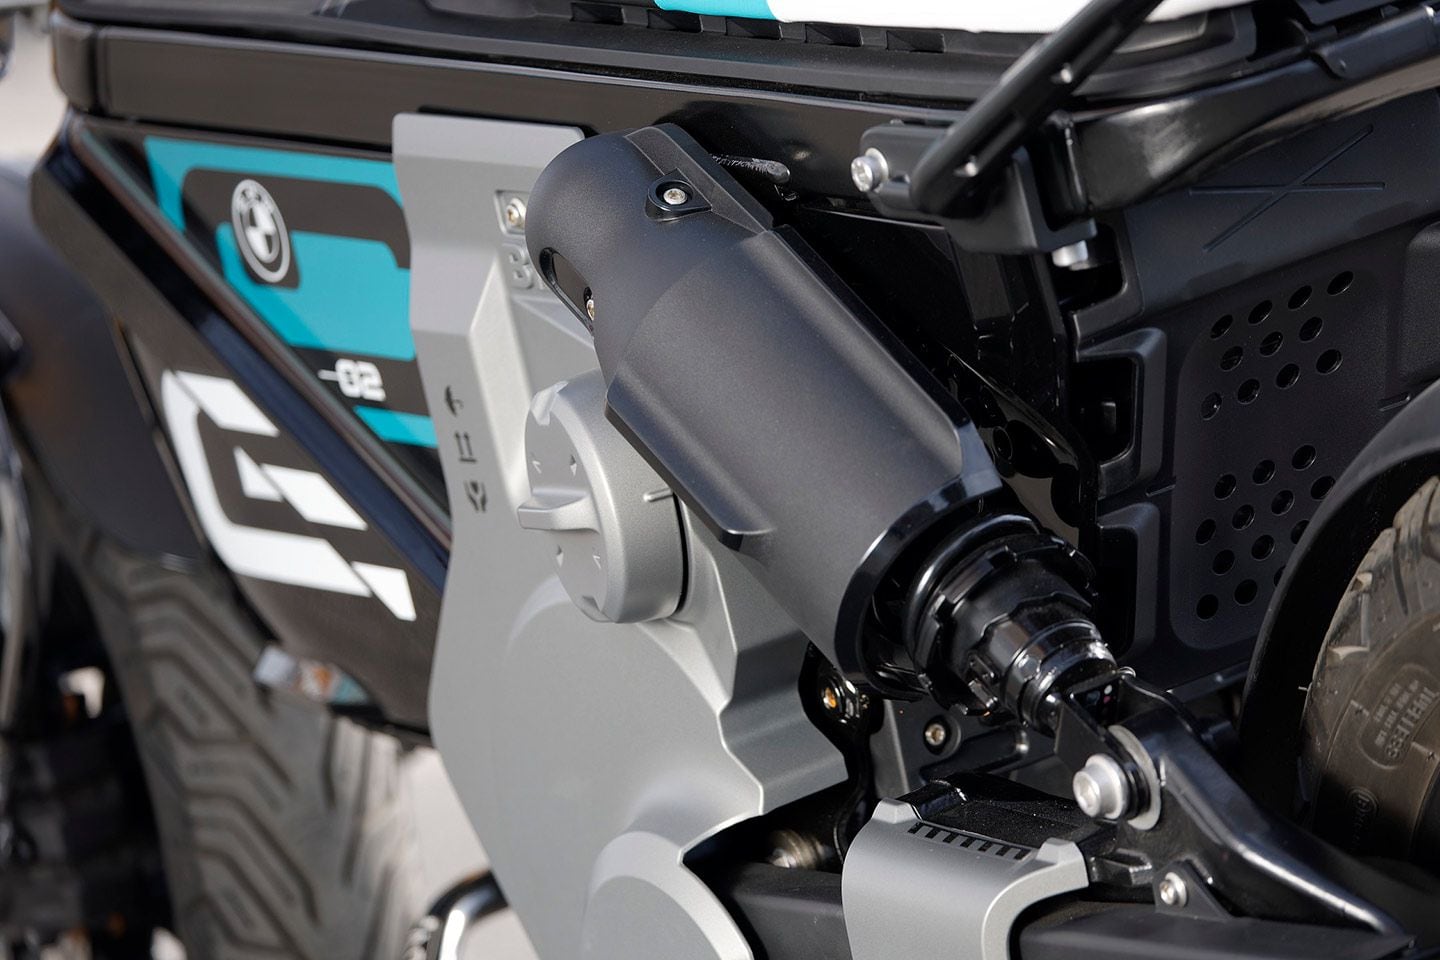 The rear shock is directly mounted to the aluminum swingarm and is adjustable for spring preload. A 14-inch disc wheel with a 150/70-14 tire rolls at the other end.